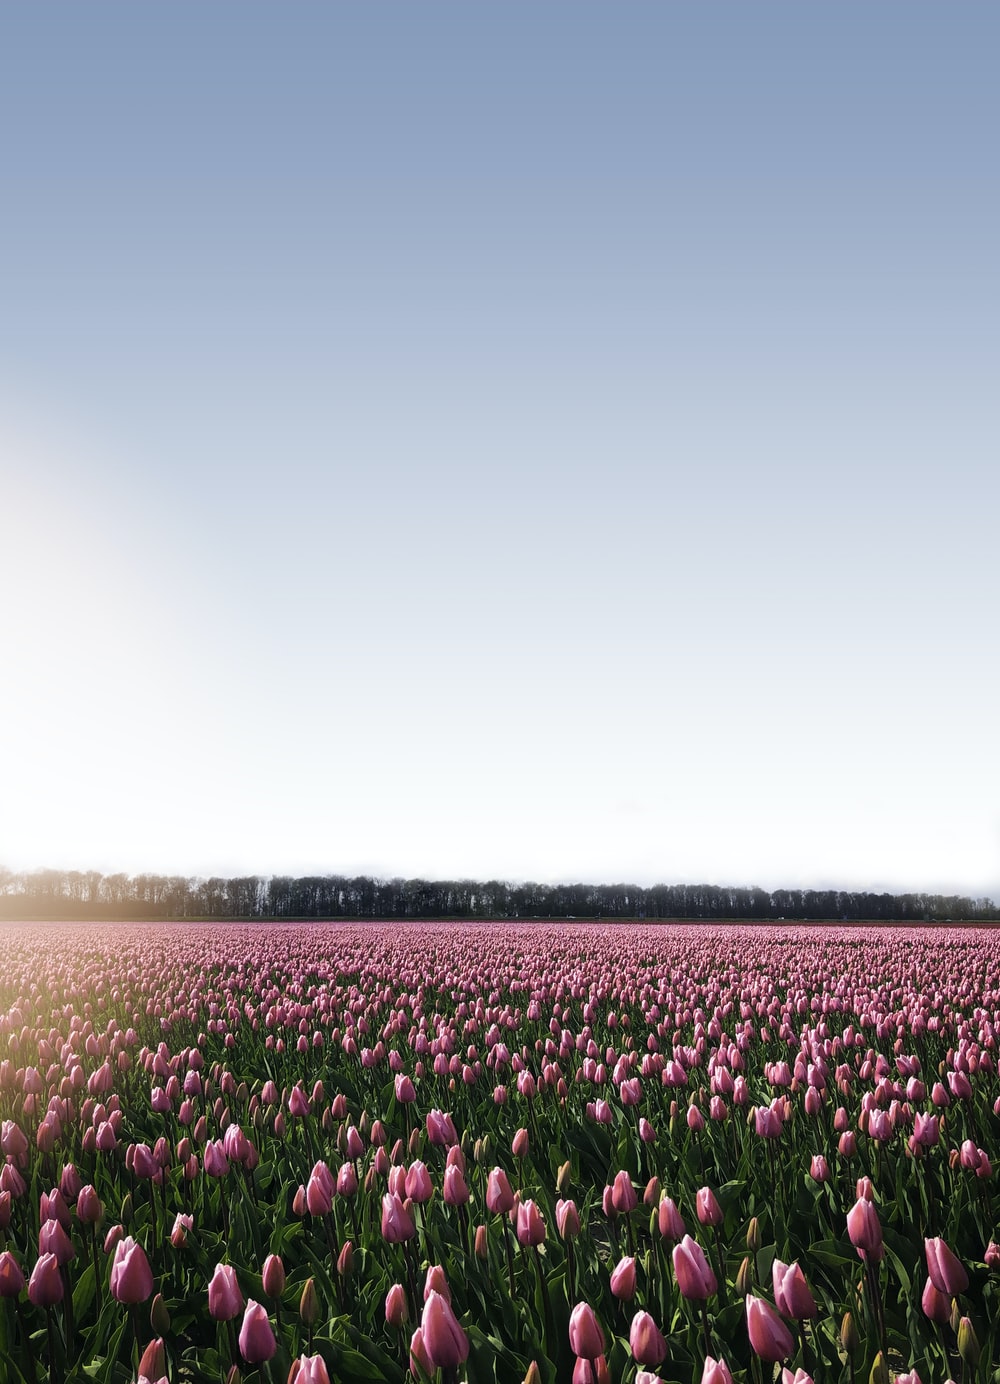 Tulip Field Picture. Download Free Image